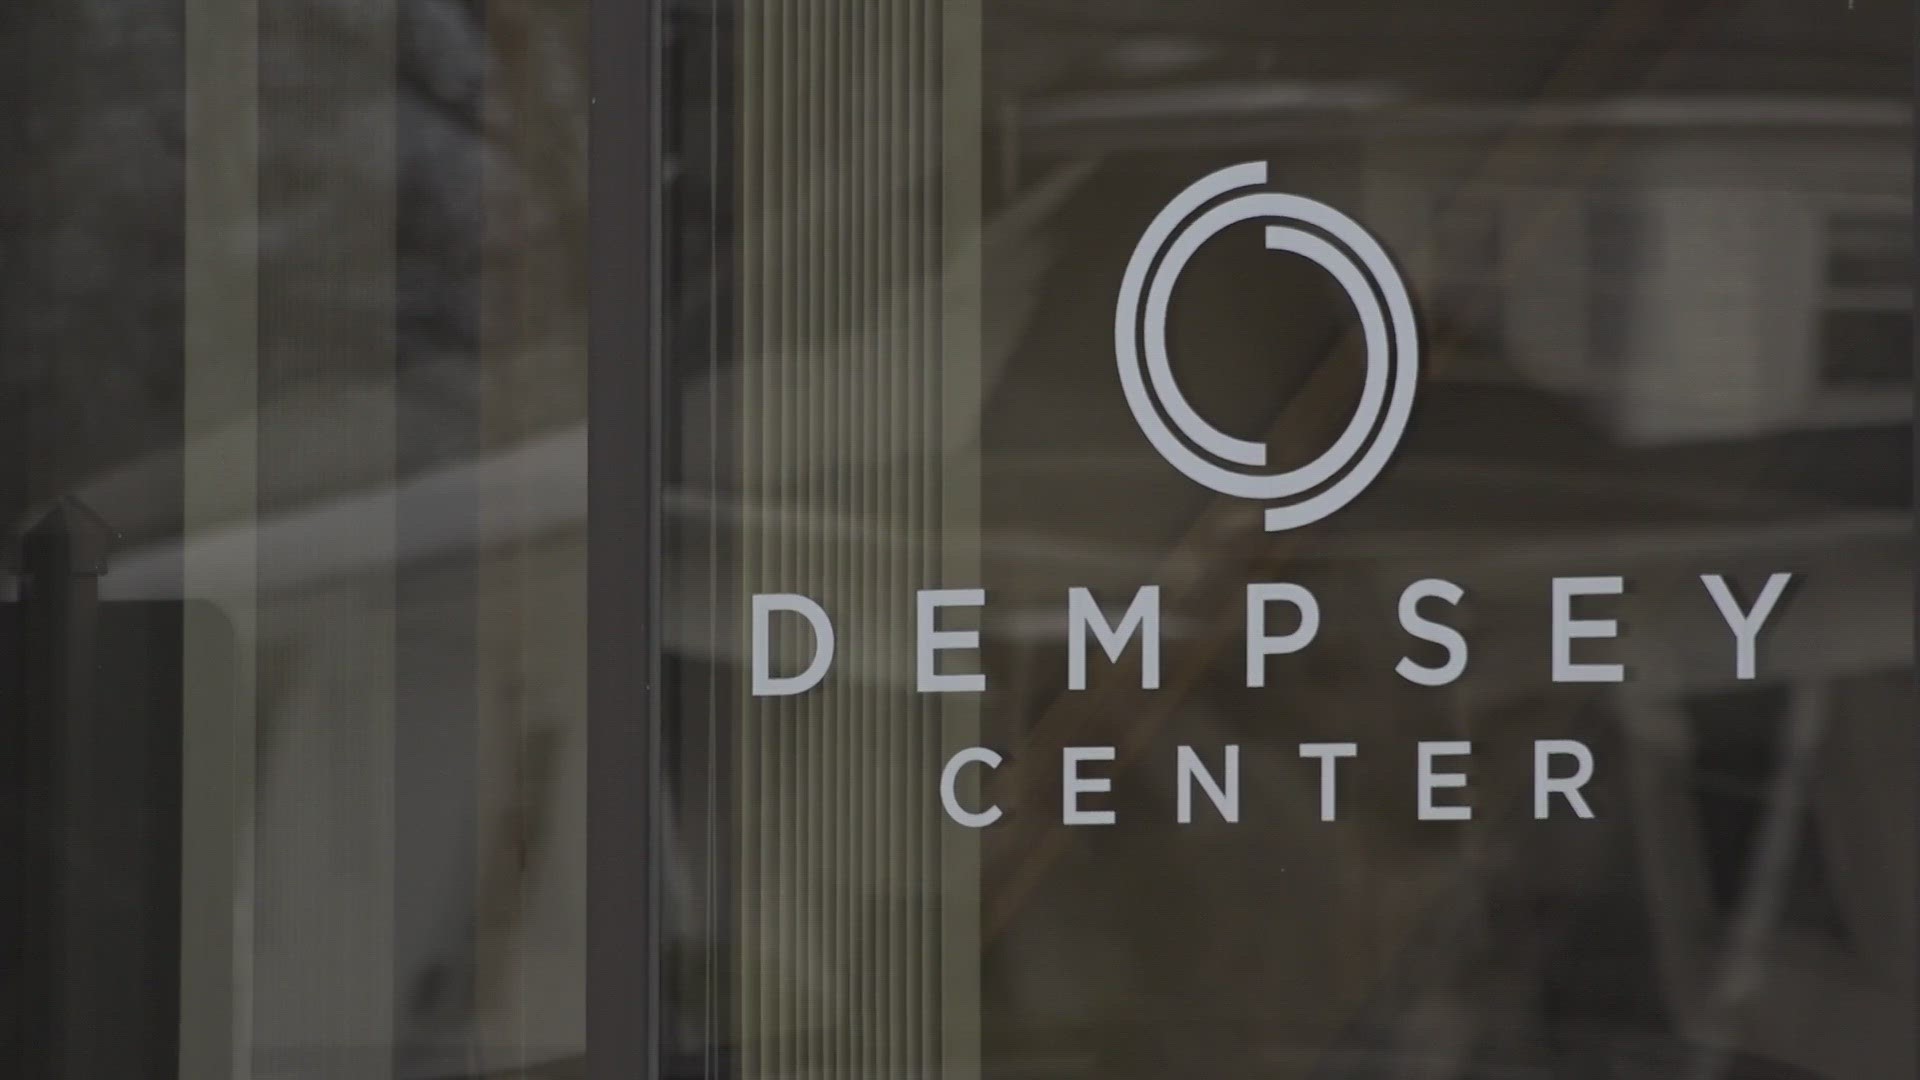 The Dempsey Center is holding its first-ever Dempsey Day of Giving on Thursday to raise money to continue to provide services to those in need for free.